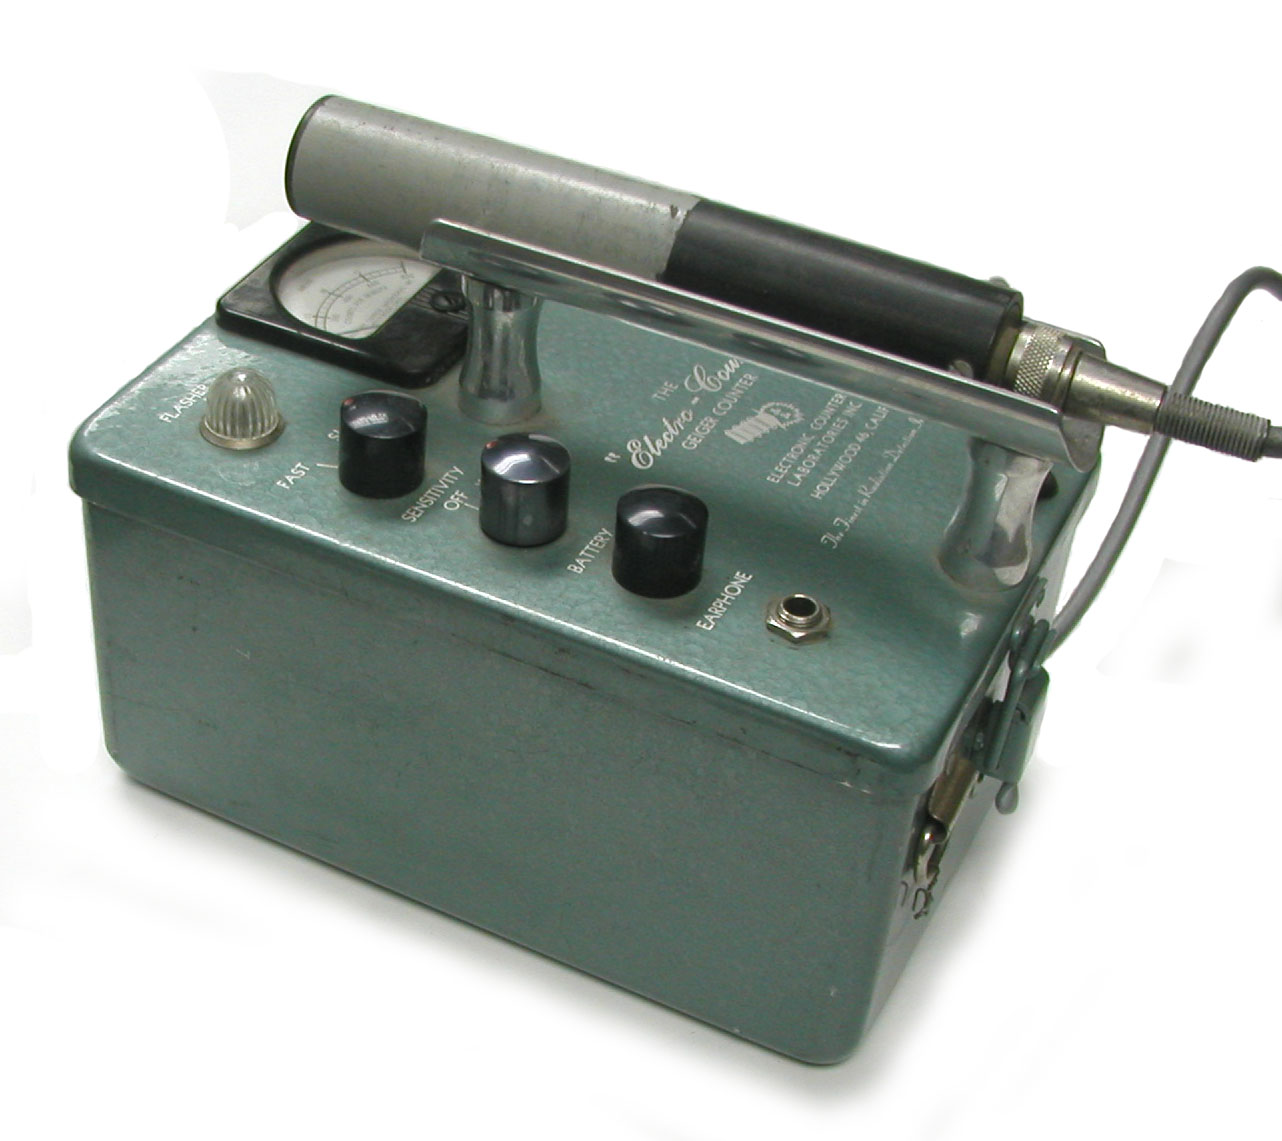 ECL  "Electro-Count" GM Detector (ca. mid 1950s)